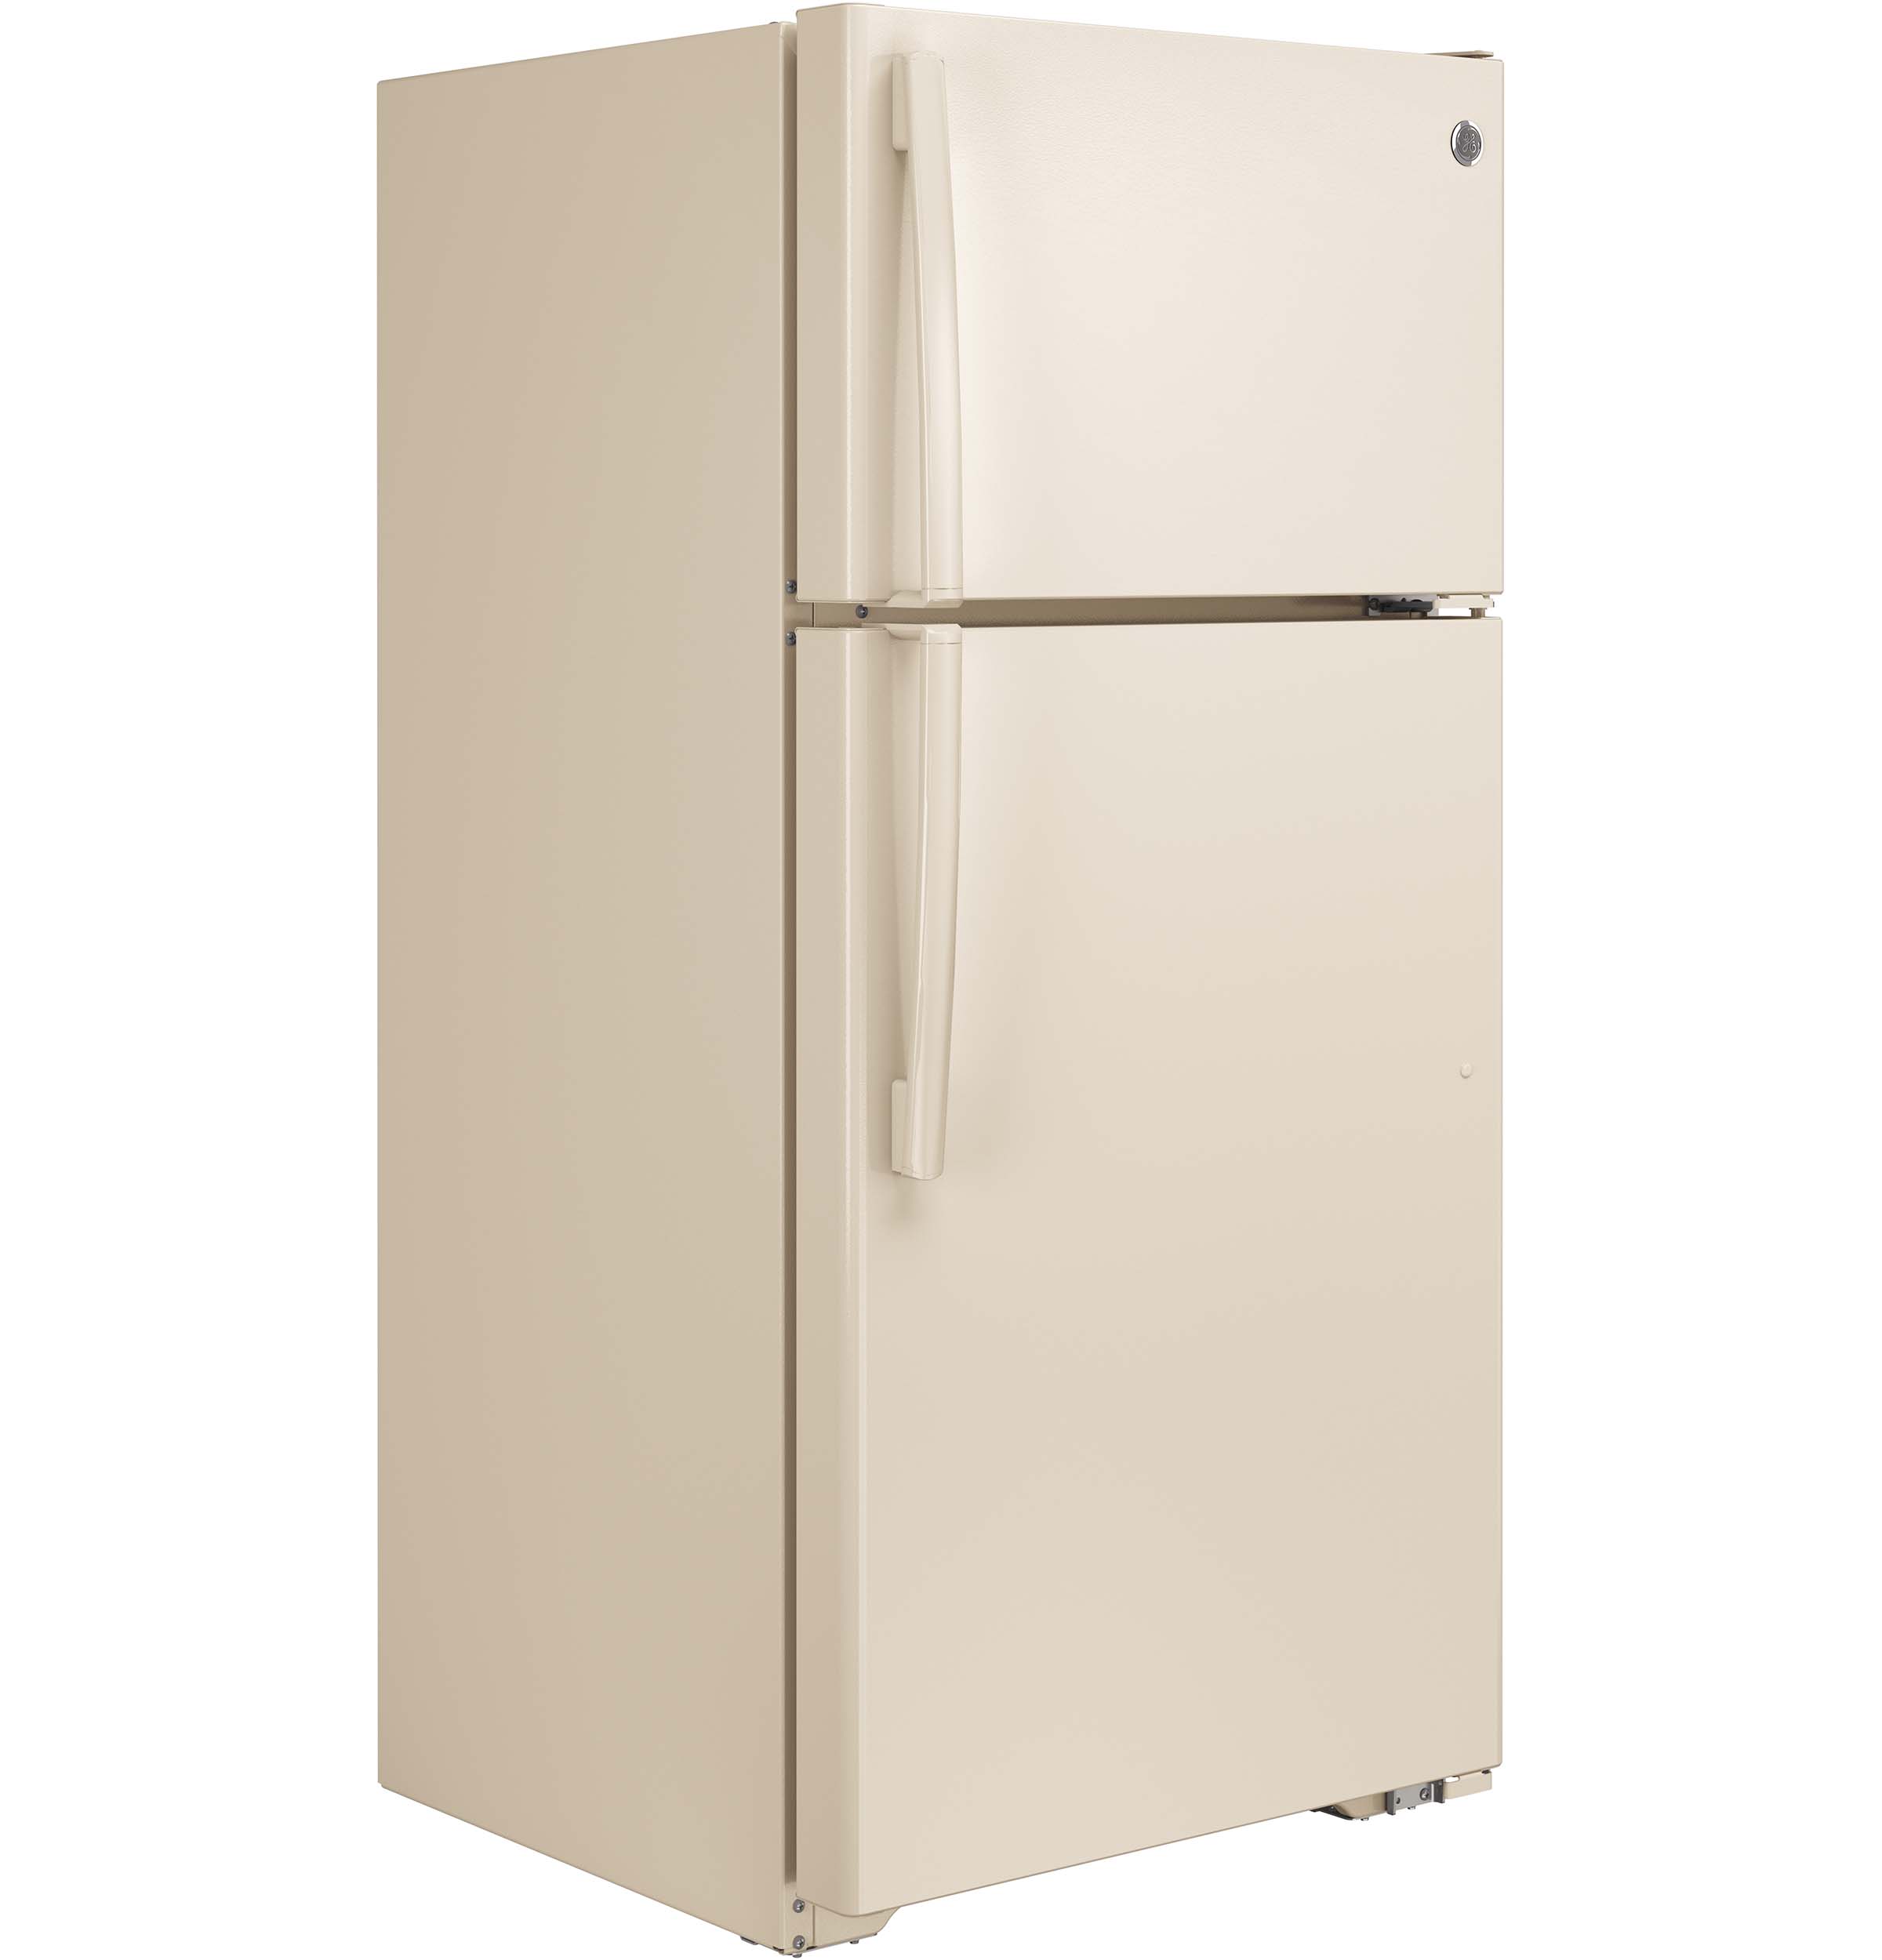 Questions and Answers: GE 14.6 Cu. Ft. Top-Freezer Refrigerator ...